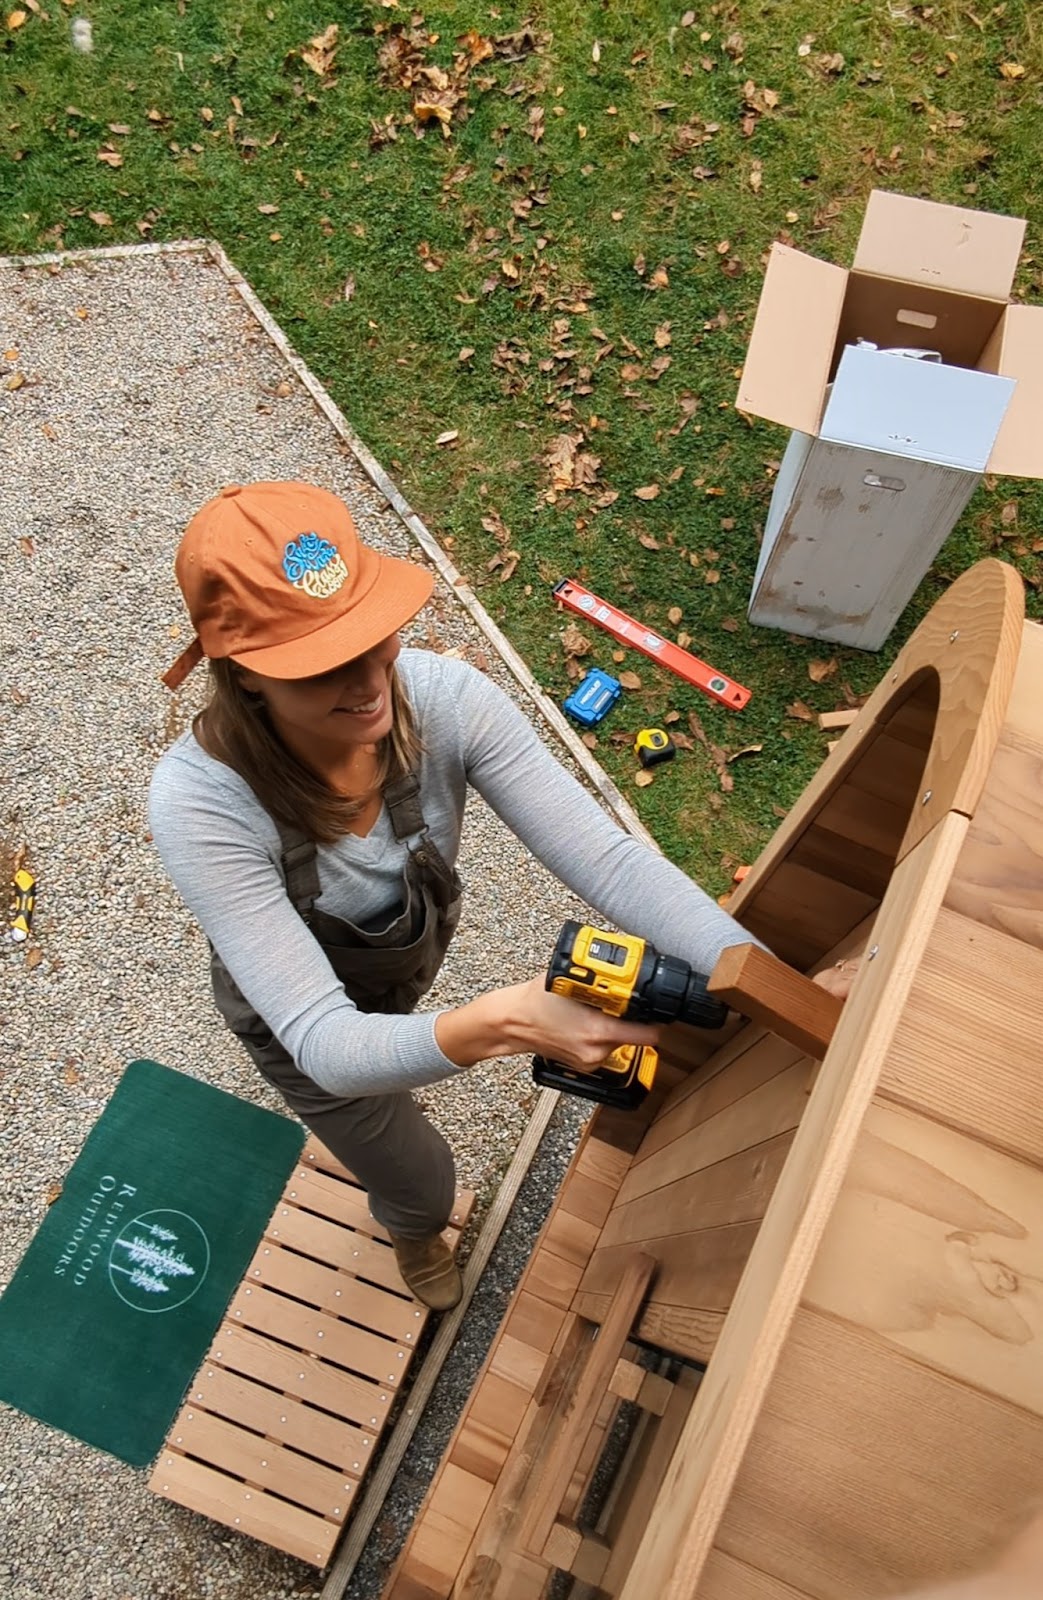 One of our clients works on assembling the Thermowood Mini-Cube Sauna